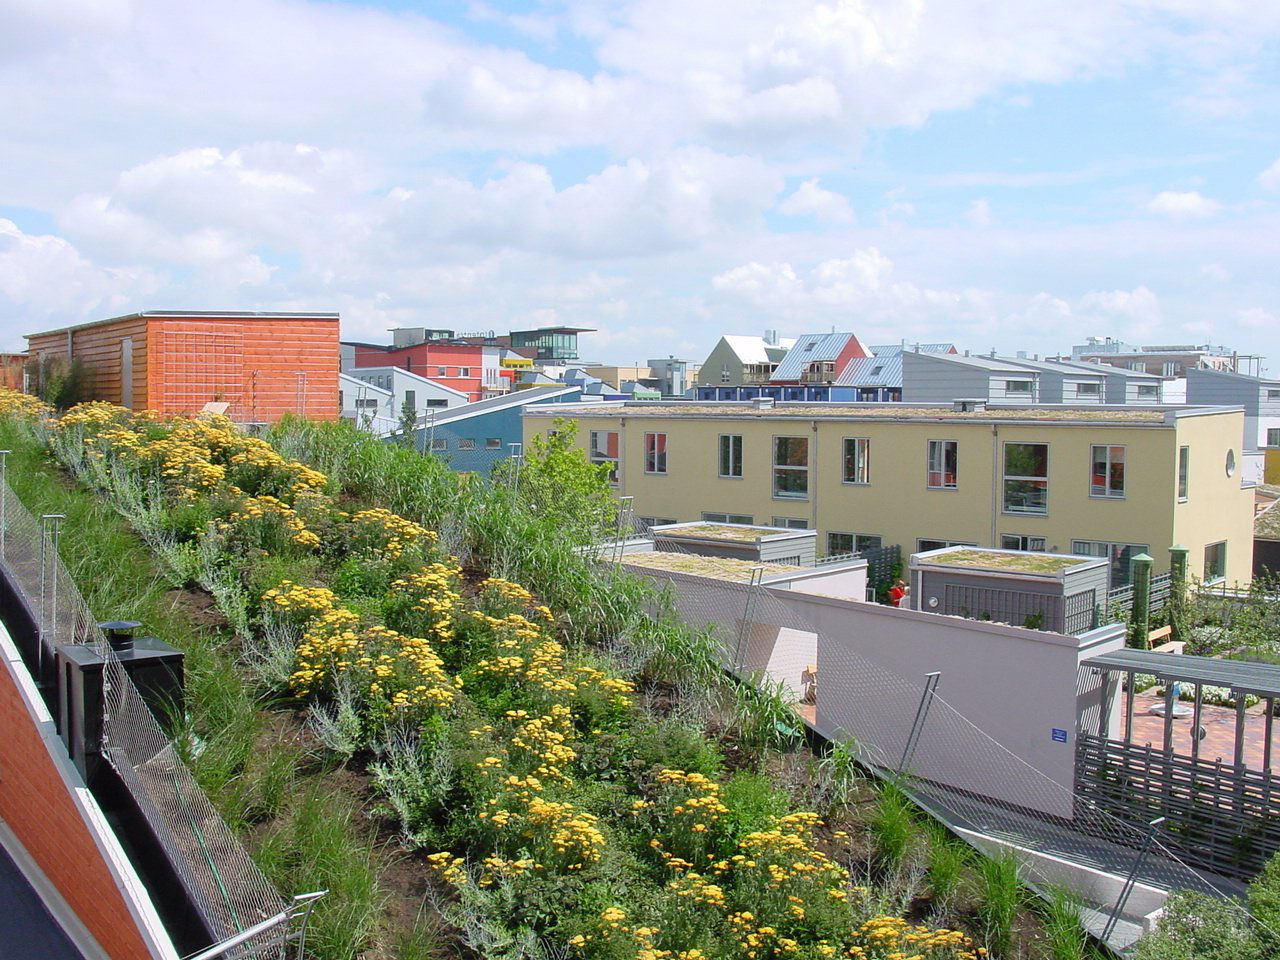 Green roof of the Bo01 District of Malmo, Sweden